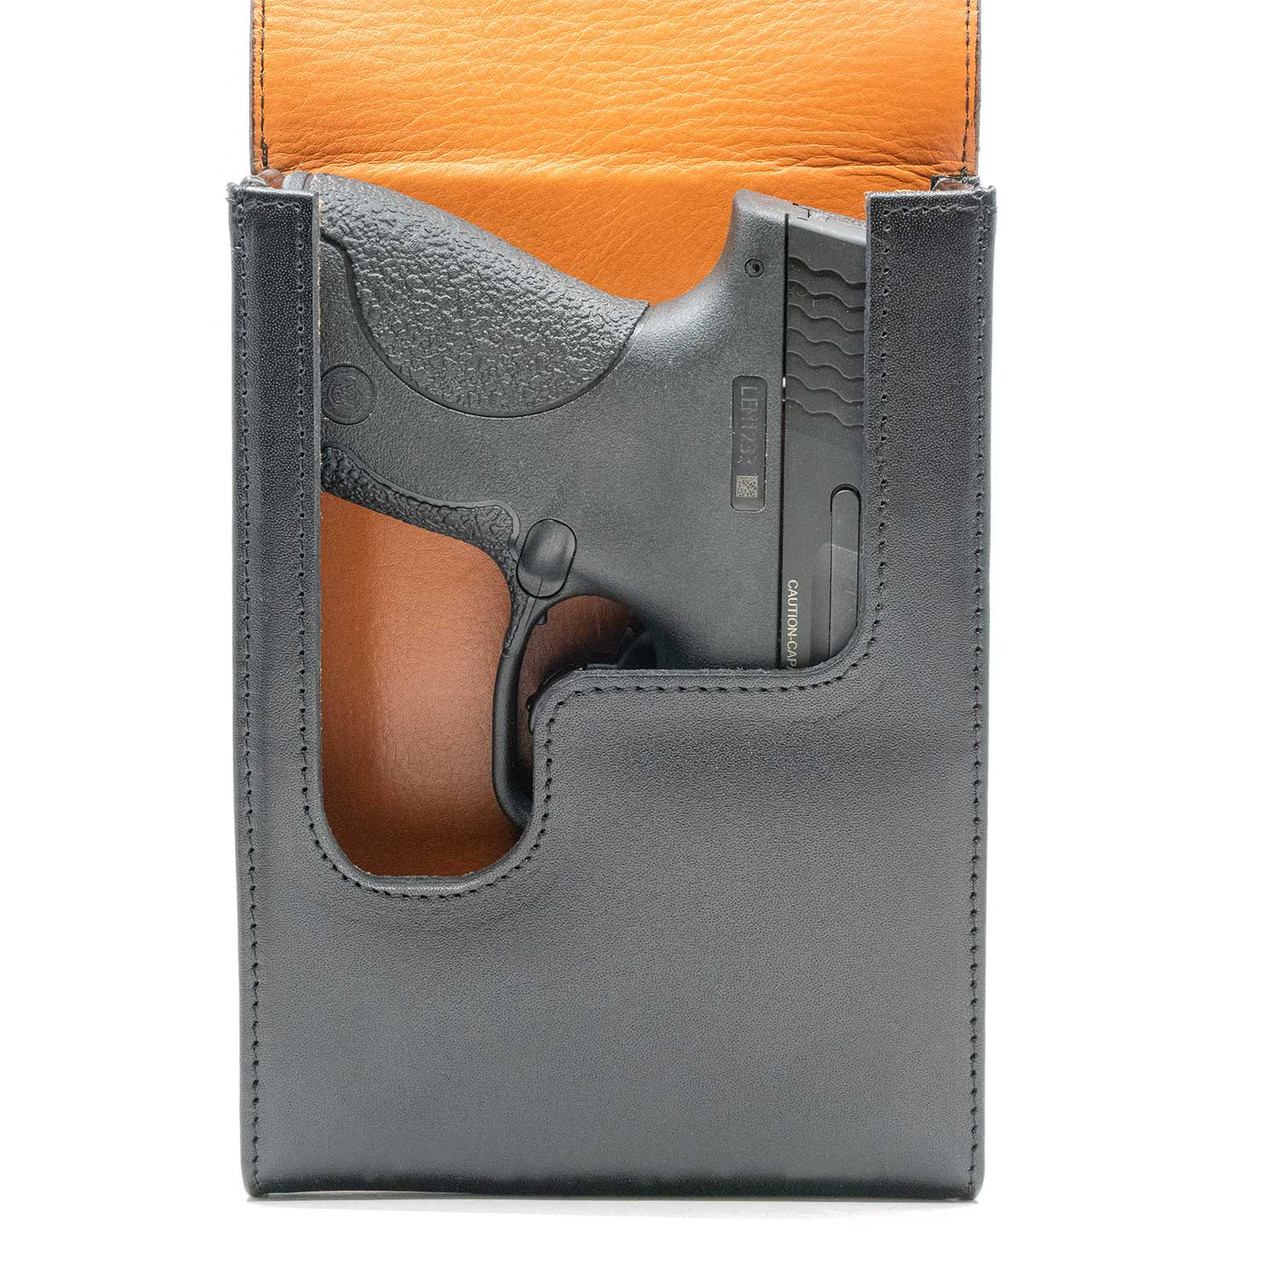 The Double Tap Xtra Mag Black Leather Holster